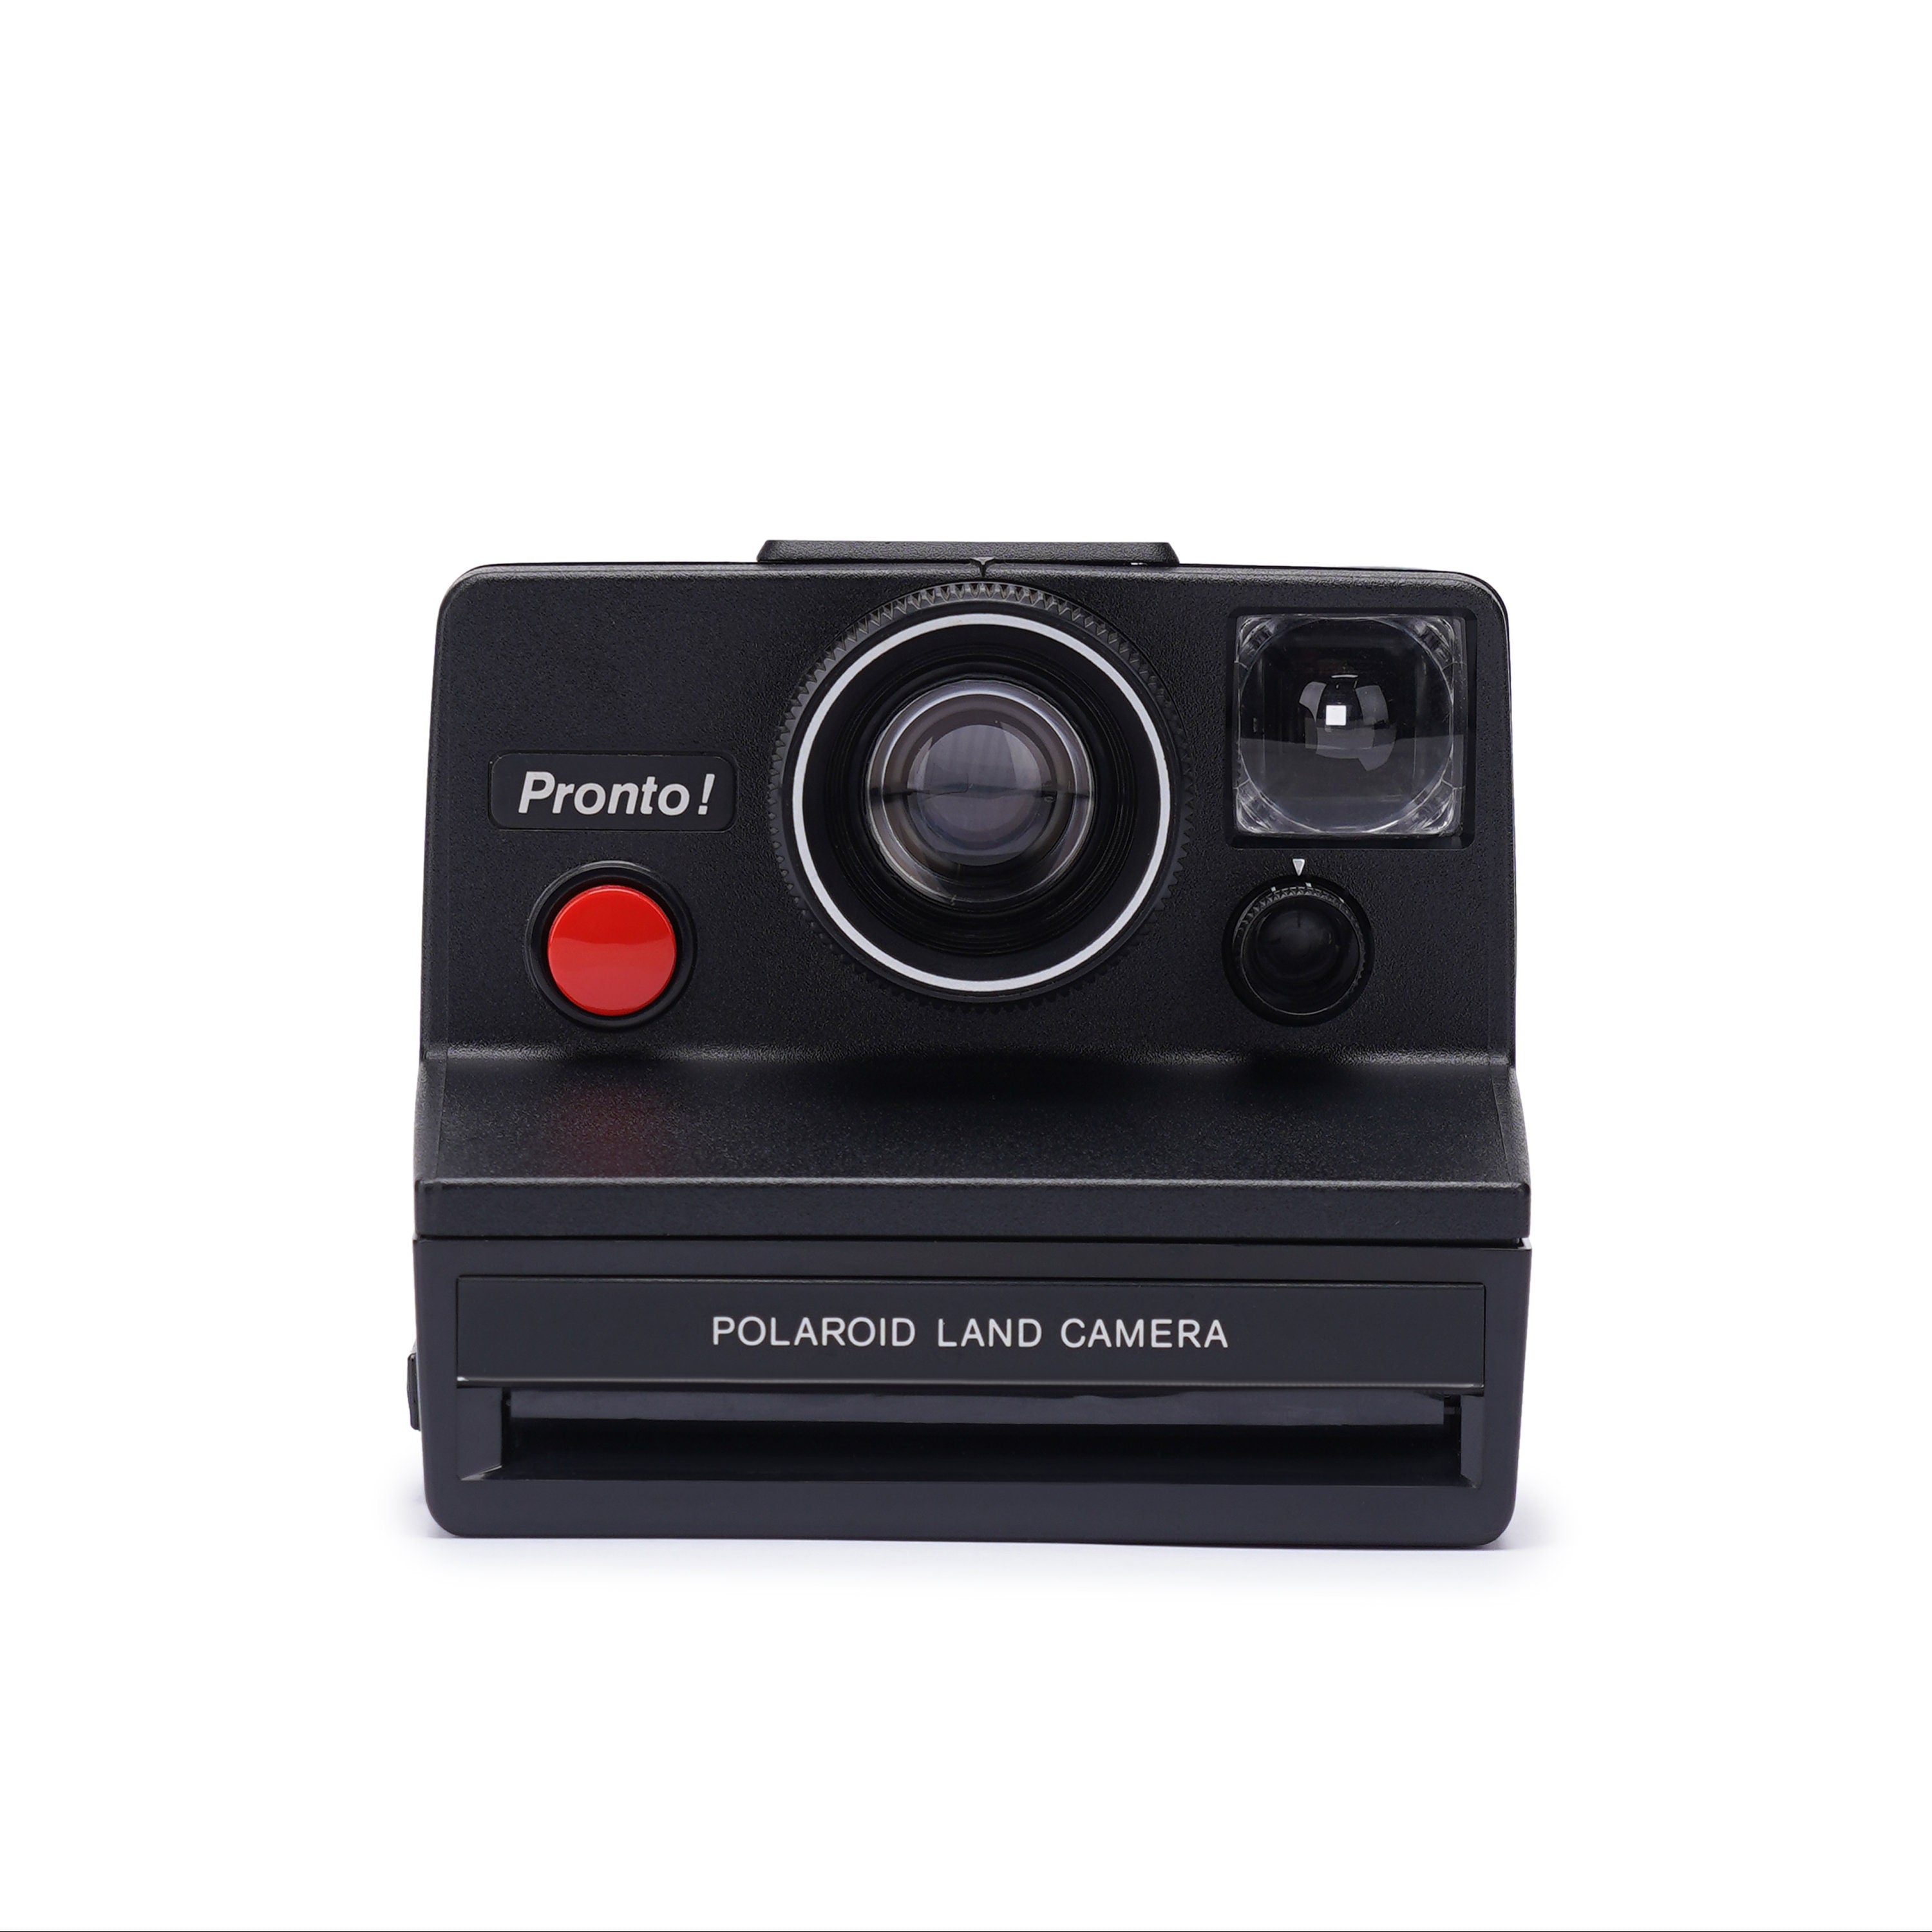 Vintage Polaroid Land Camera Pronto! Black with Red Button Instant Cam